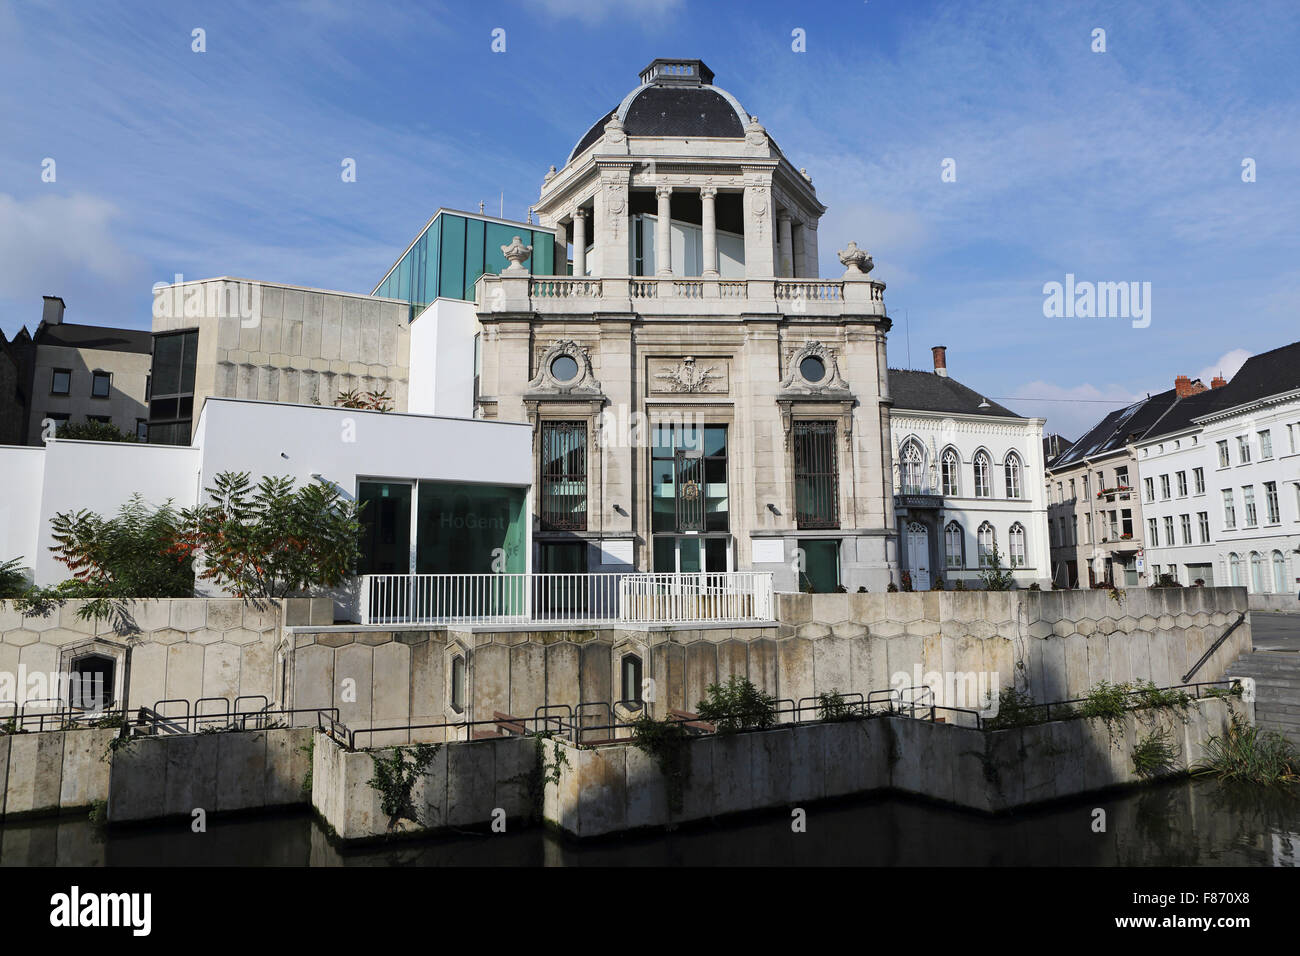 A building used by the Hogeschool Gent in Ghent, Belgium. The grand building stands next to Duivelsteen Castle. Stock Photo